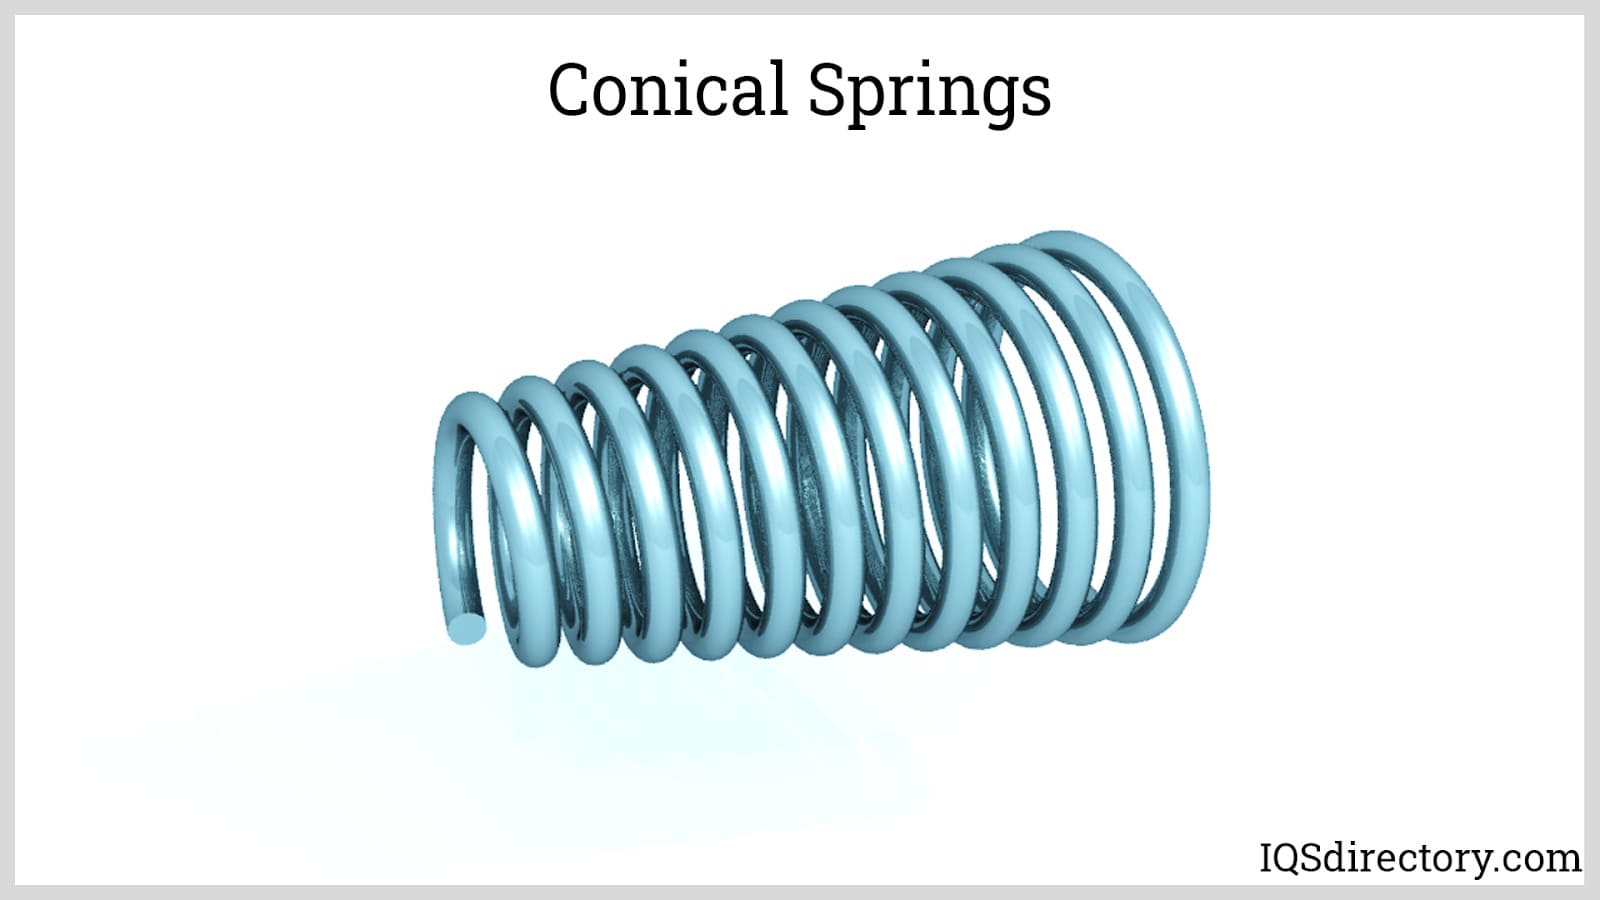 Conical Springs